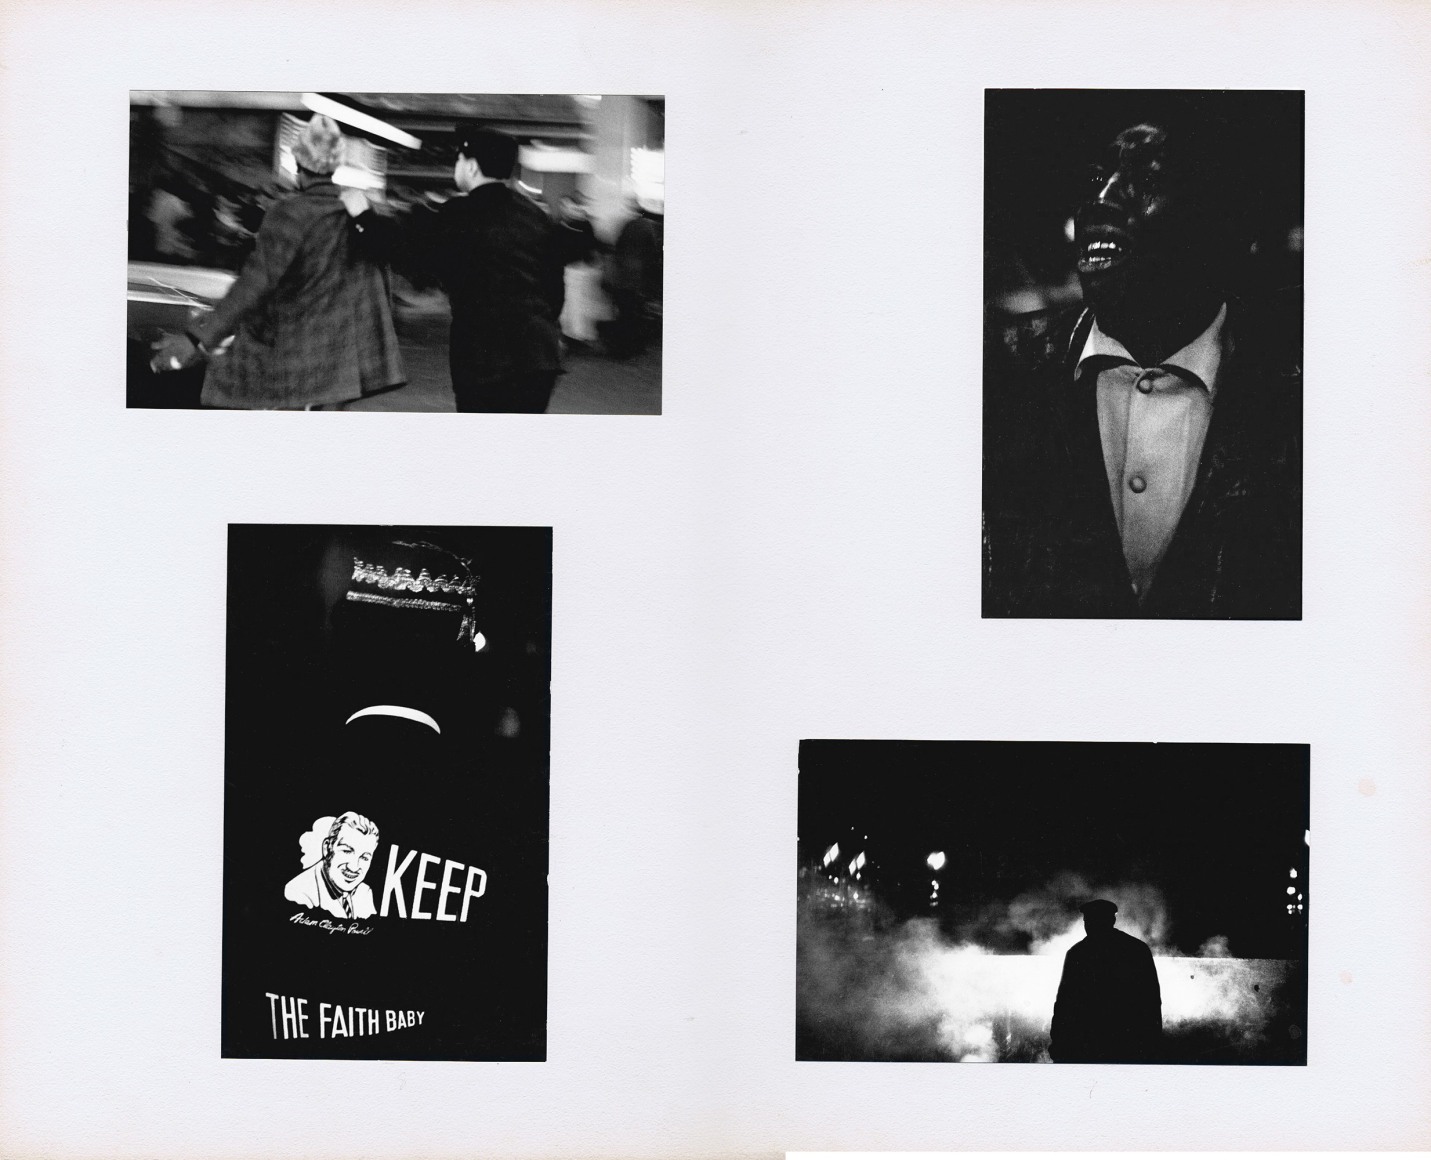 32. Beuford Smith, I Have a Dream: The Assassination of Martin Luther King, Jr., April 5, 1968. Four photographs mounted on white board. Features a man being arrested, a young man crying, a man wearing a jacket that reads &quot;Keep the faith, baby,&quot; and a figure silhouetted against clouds of smoke.